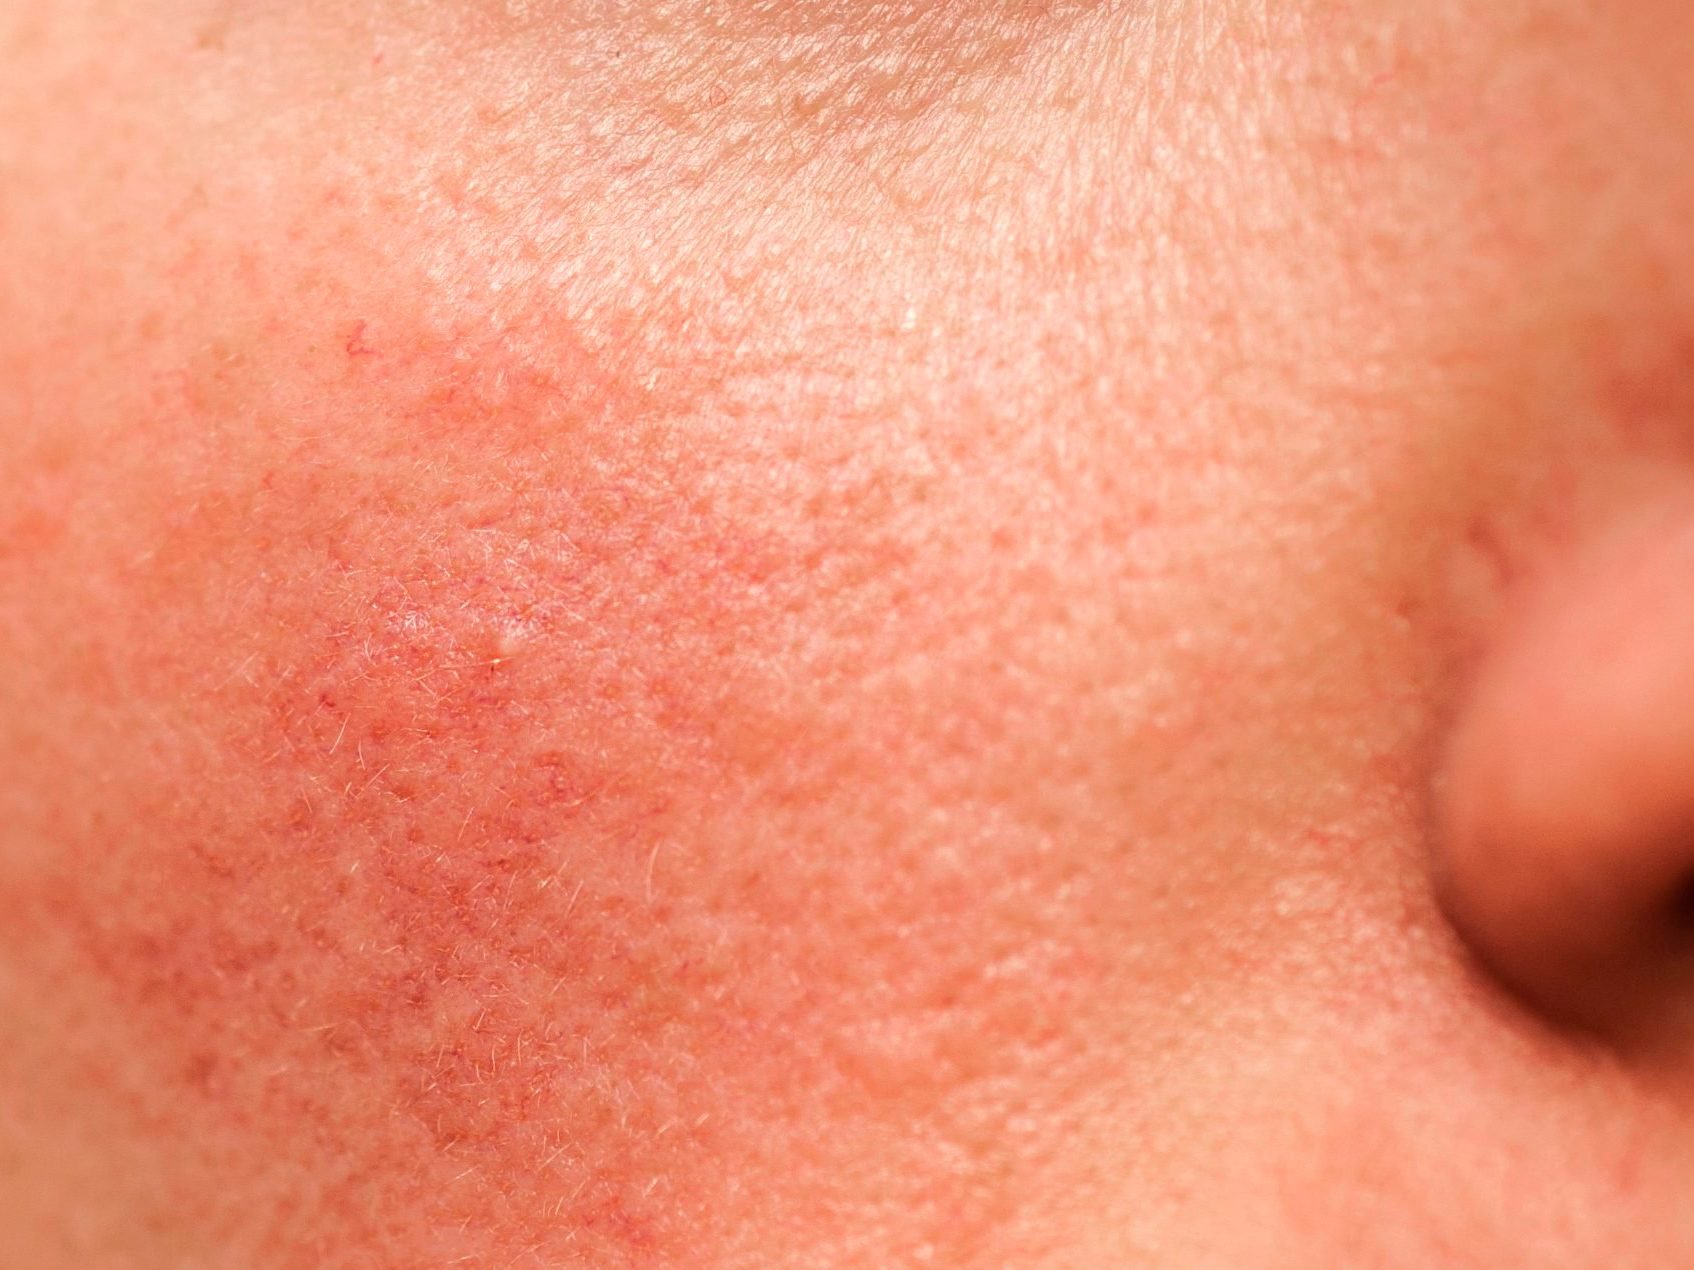 How to Tell the Difference Between Psoriasis, Rosacea, and Eczema - rosacea on face